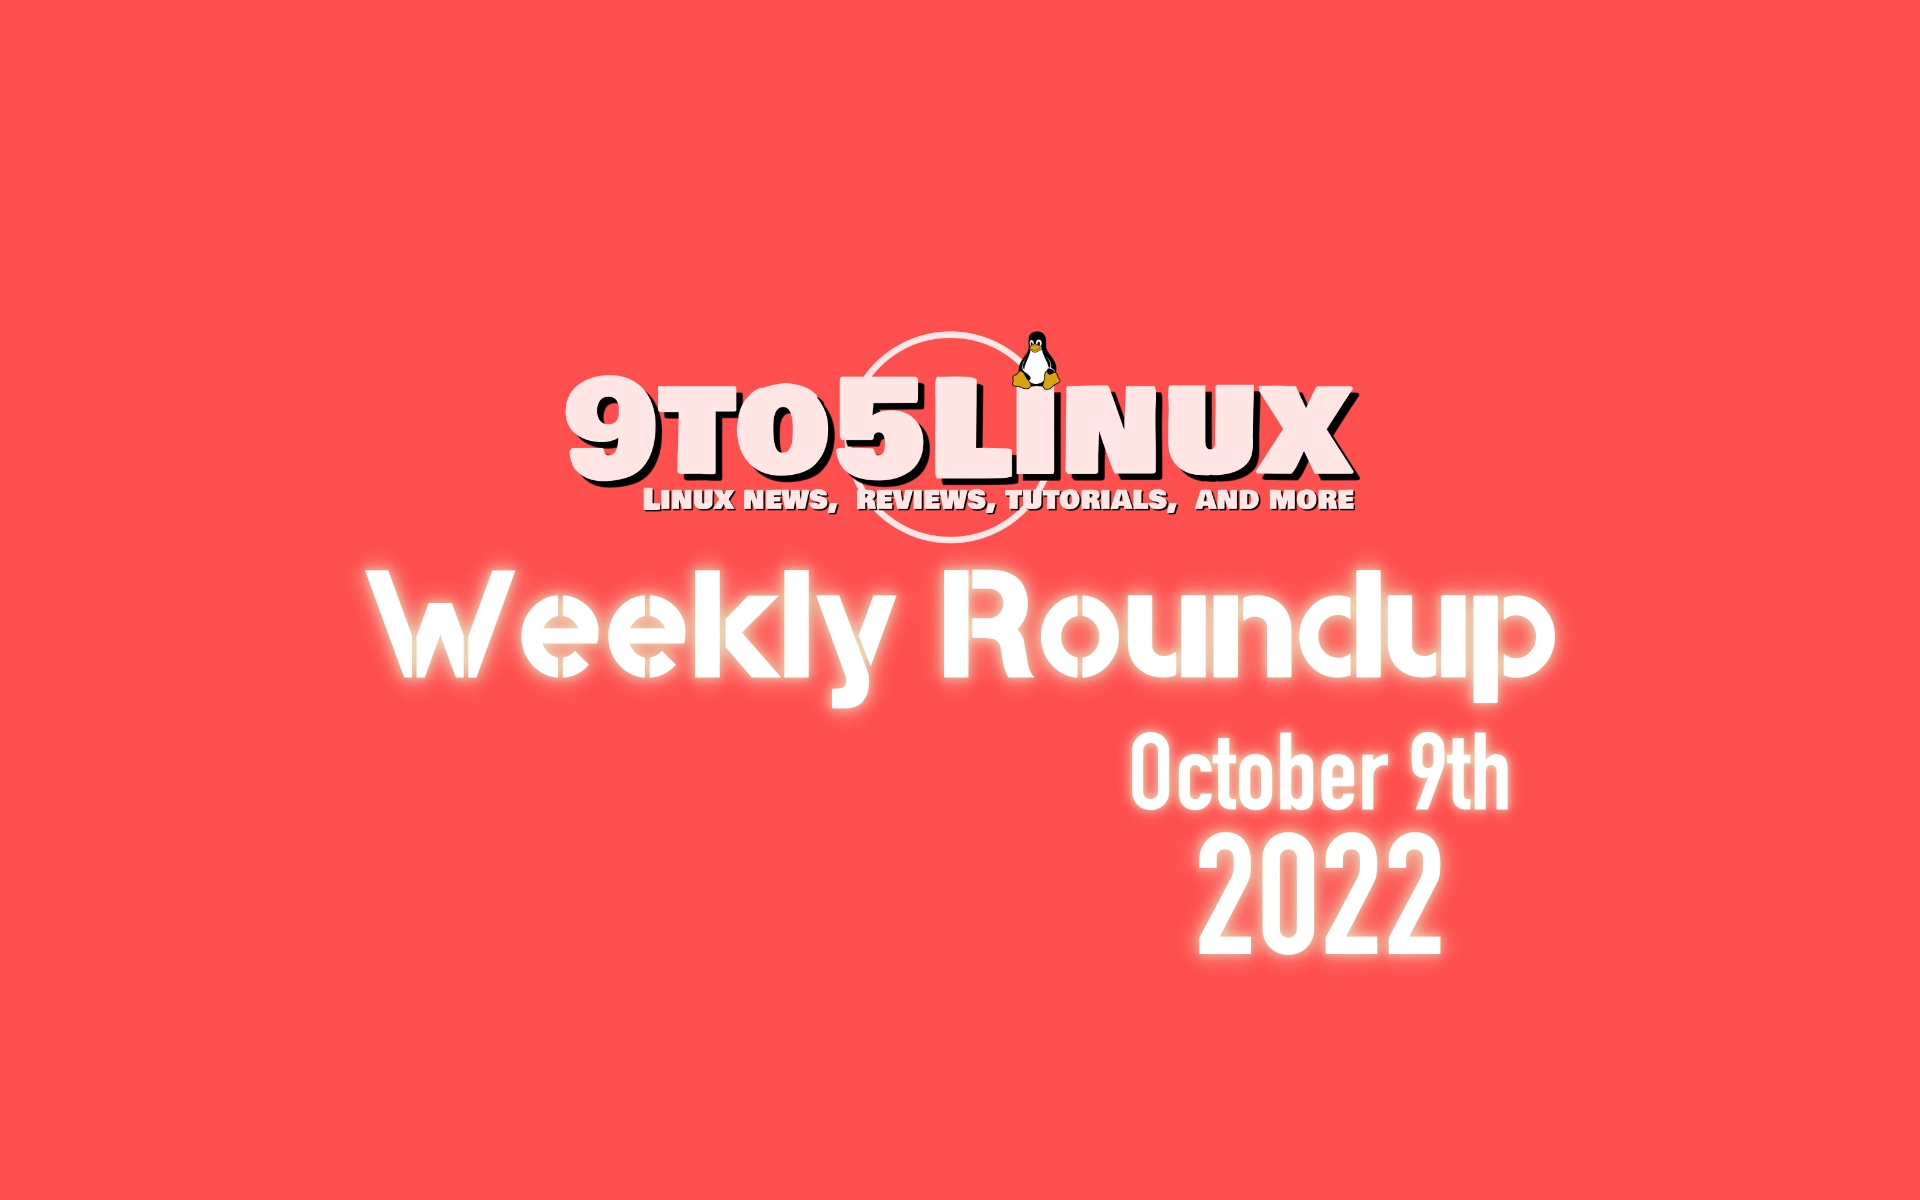 9to5Linux Weekly Roundup: October 9th, 2022